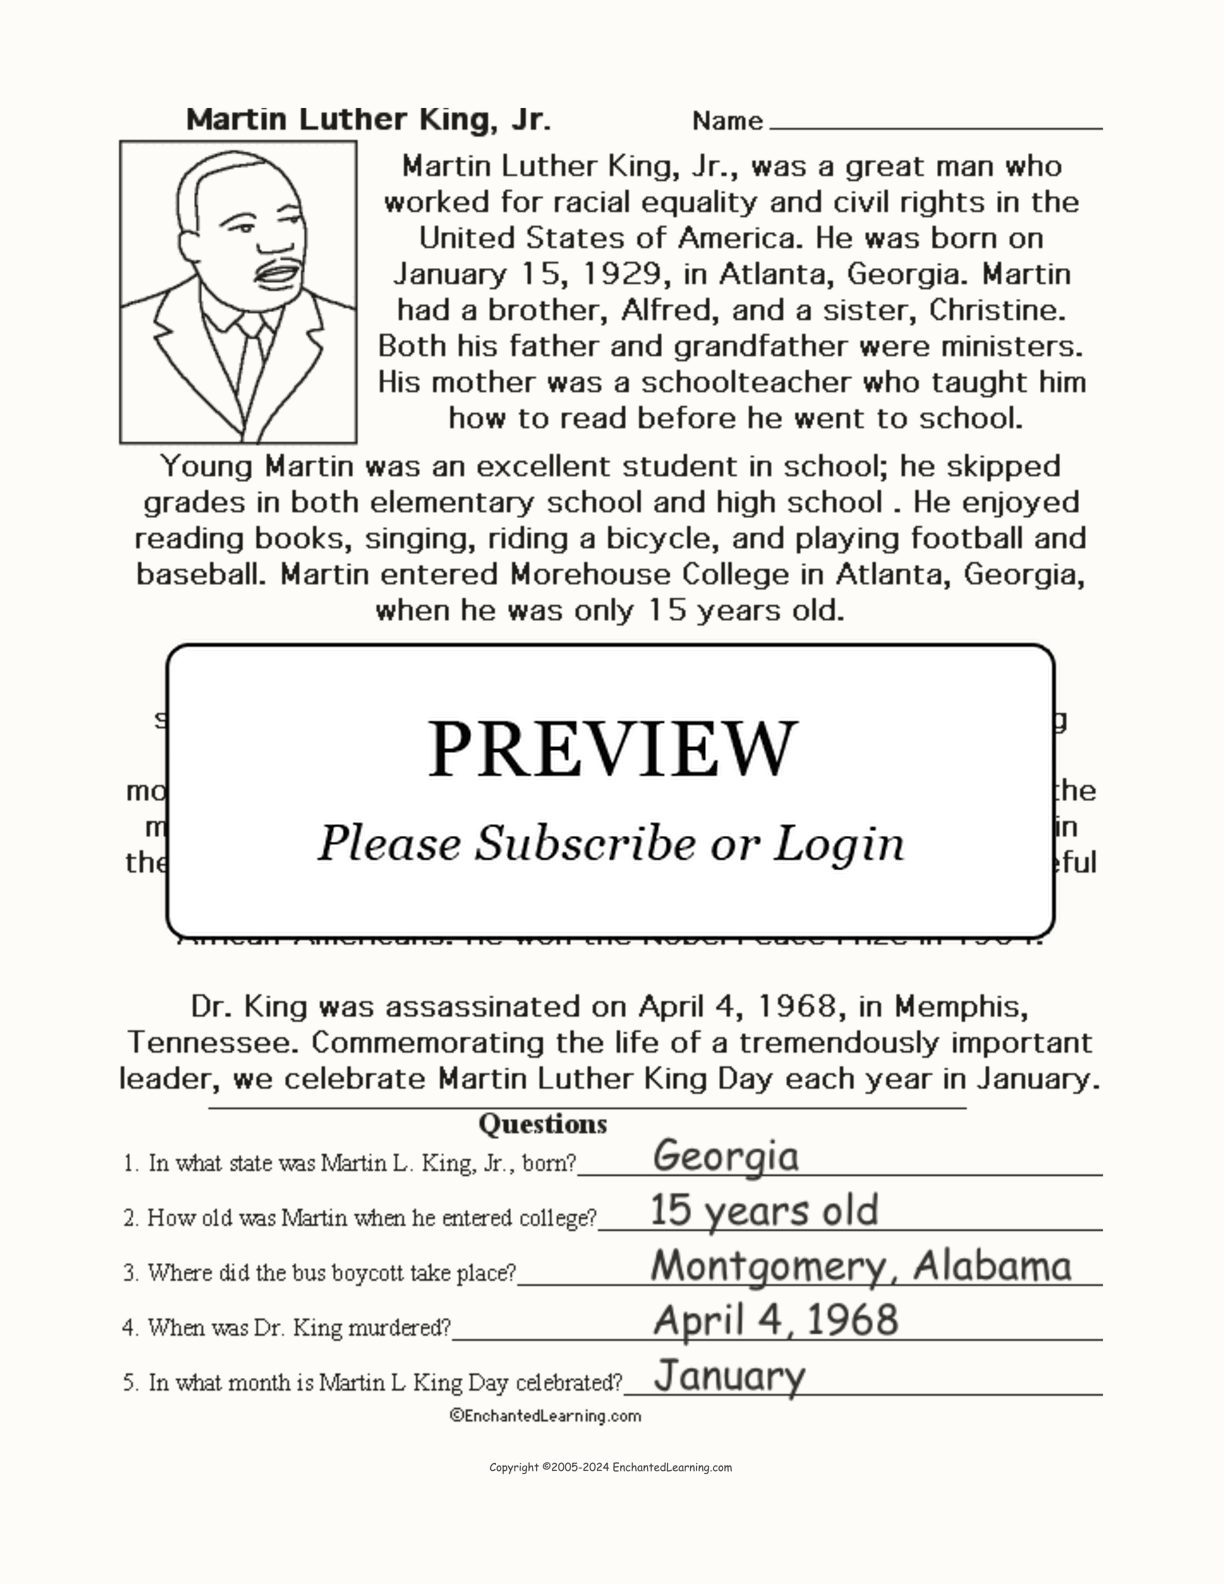 Martin Luther King, Jr., Biography (with Questions) interactive worksheet page 2